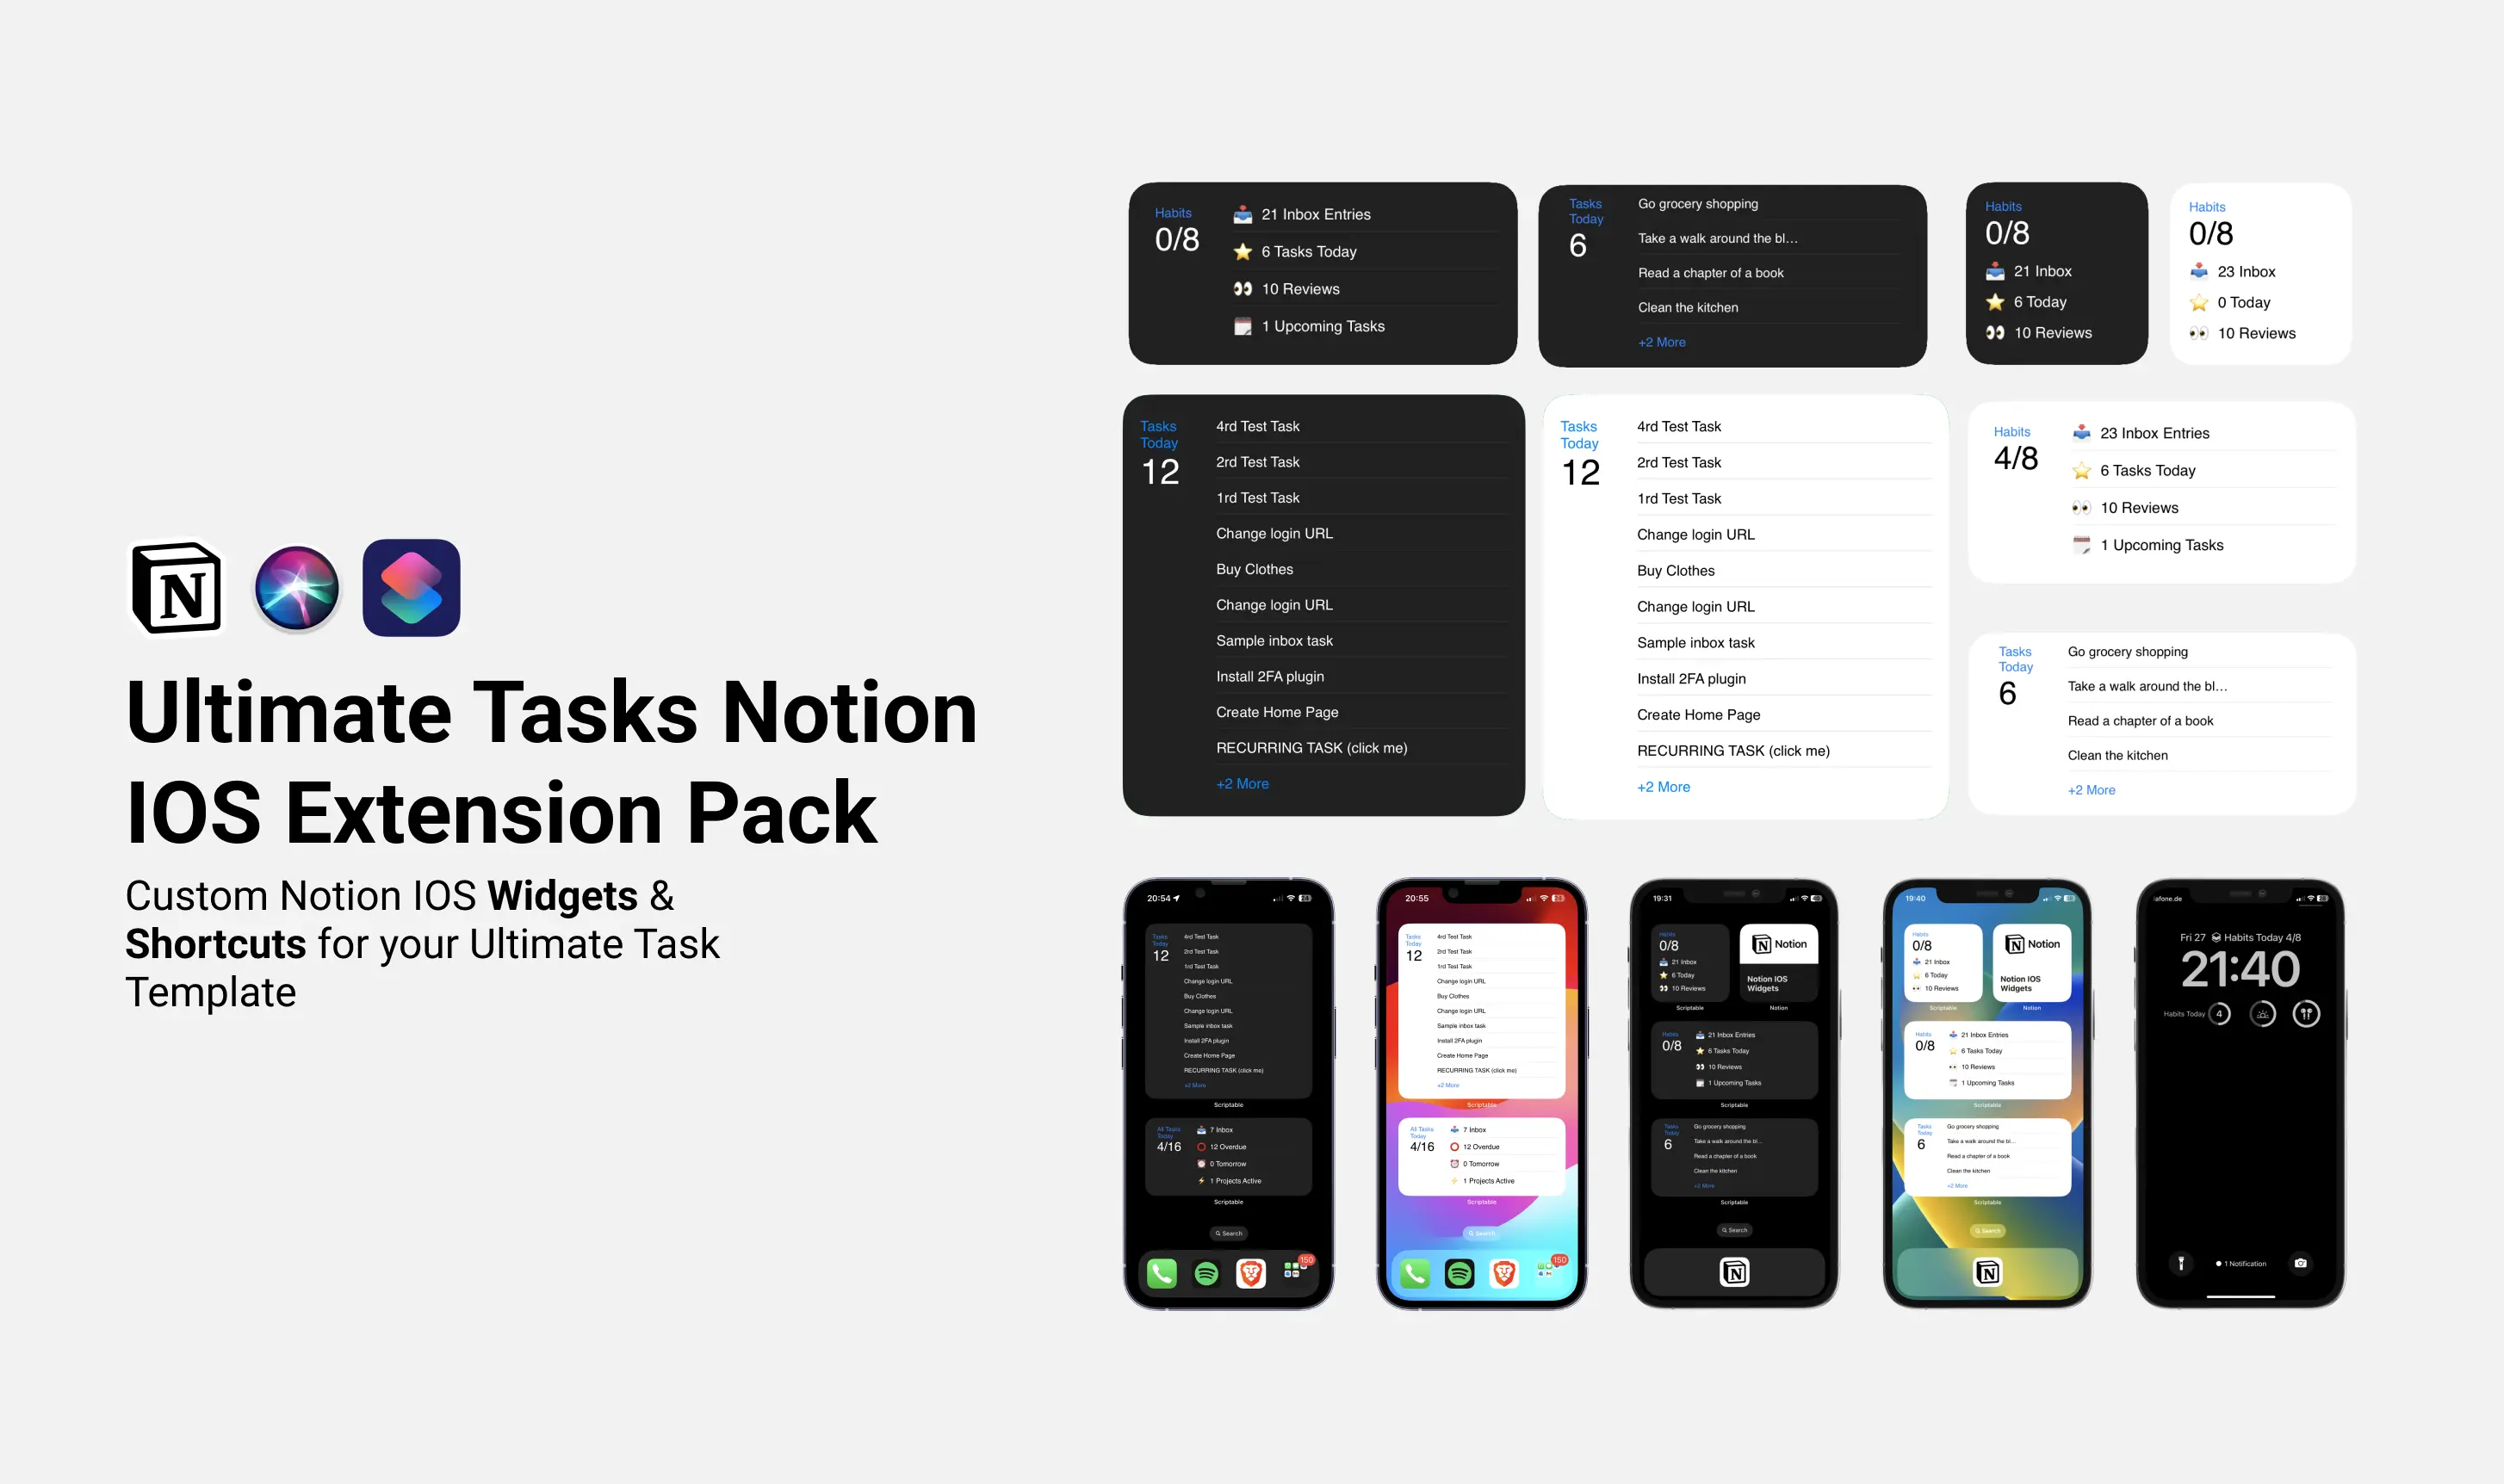 Ultimate Tasks Ios Extension Pack image